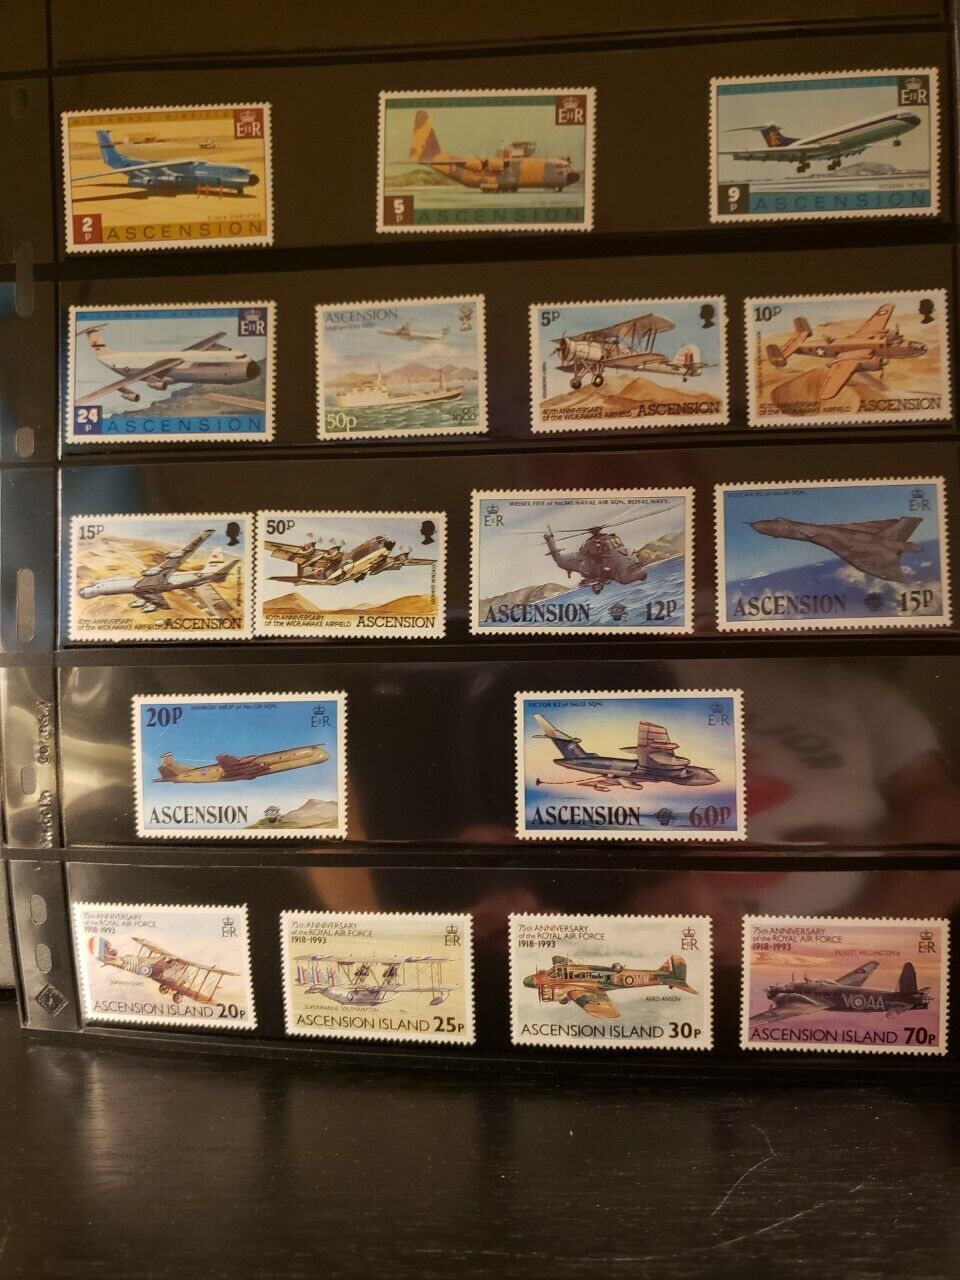 Ascension Island Aircraft & Aviation Stamps Lot of 24 - MNH-See Details for List Без бренда